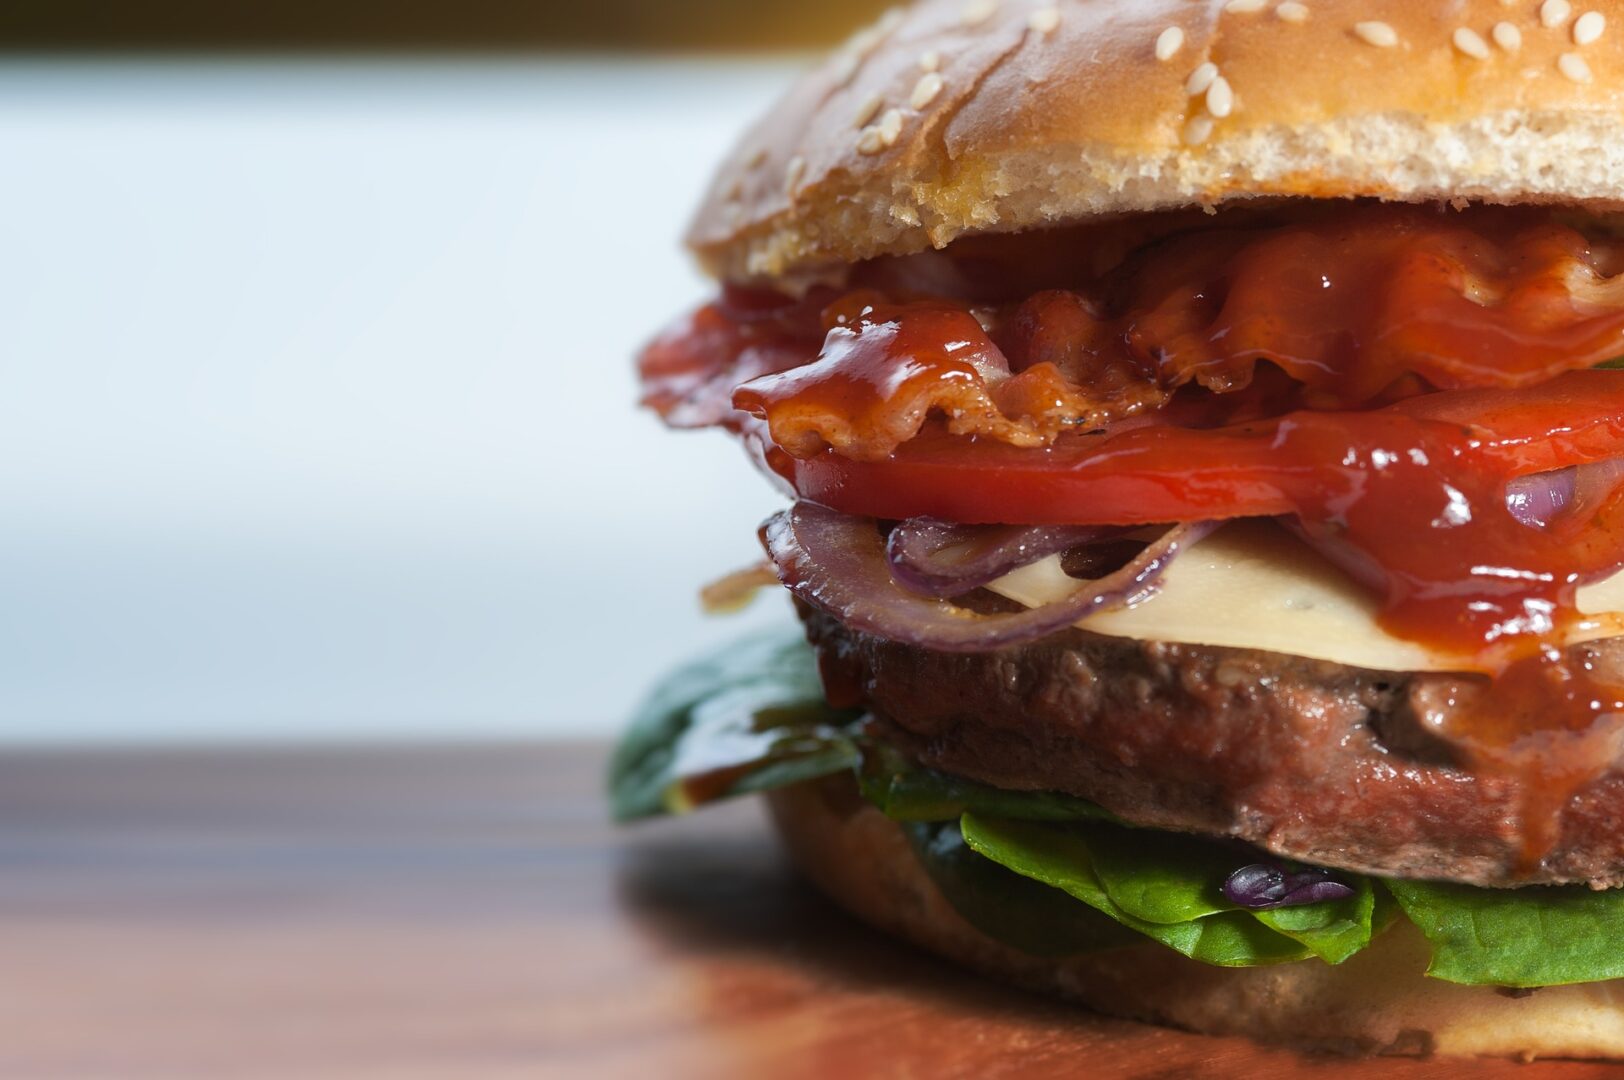 Close-up of a juicy burger with lettuce, tomato, onions, cheese, and a glossy, rich sauce on a sesame seed bun.